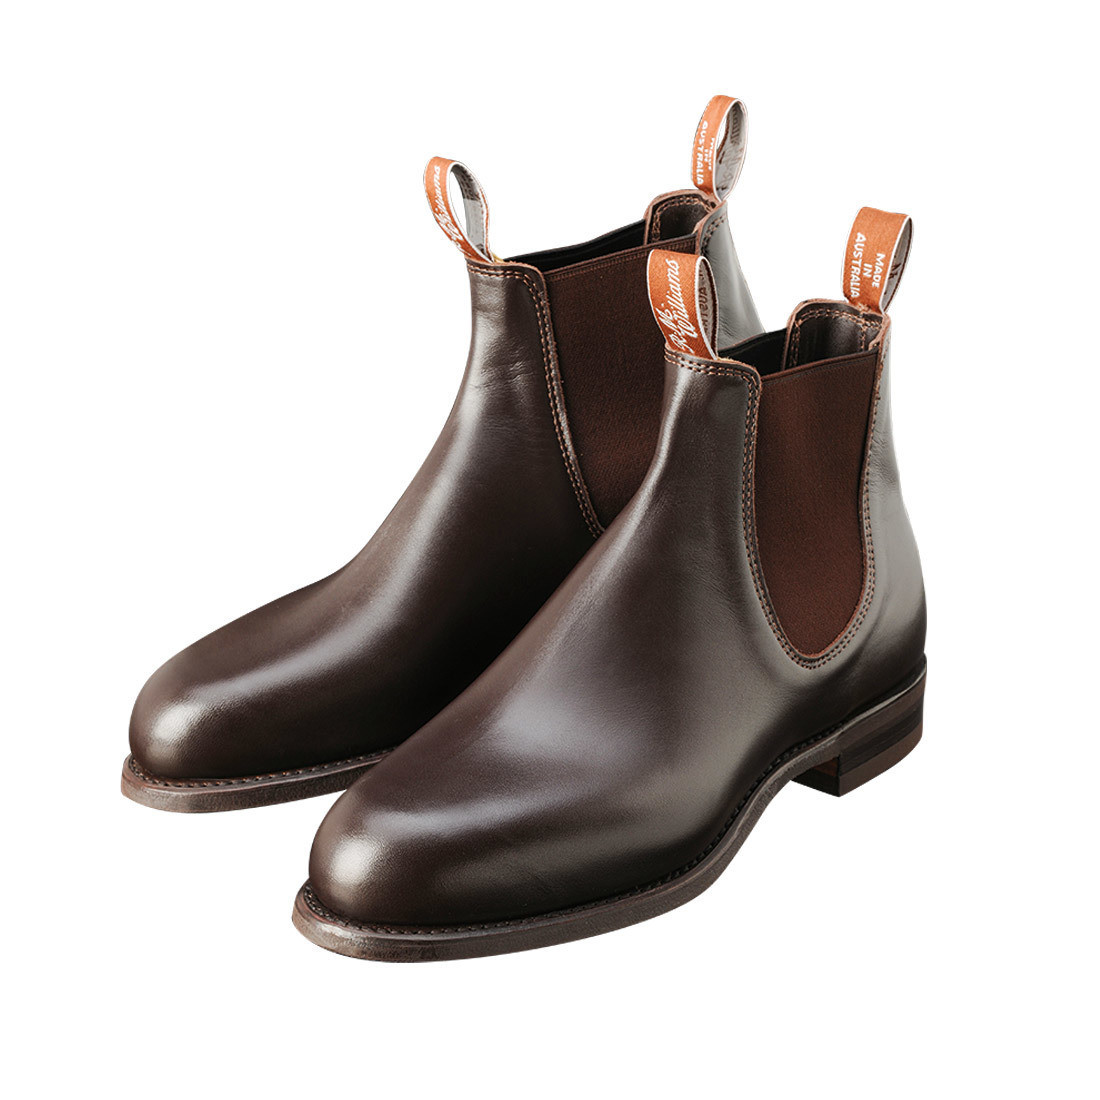 R.M. Williams Boots in Chestnut  Boots, R m williams boots, Rm